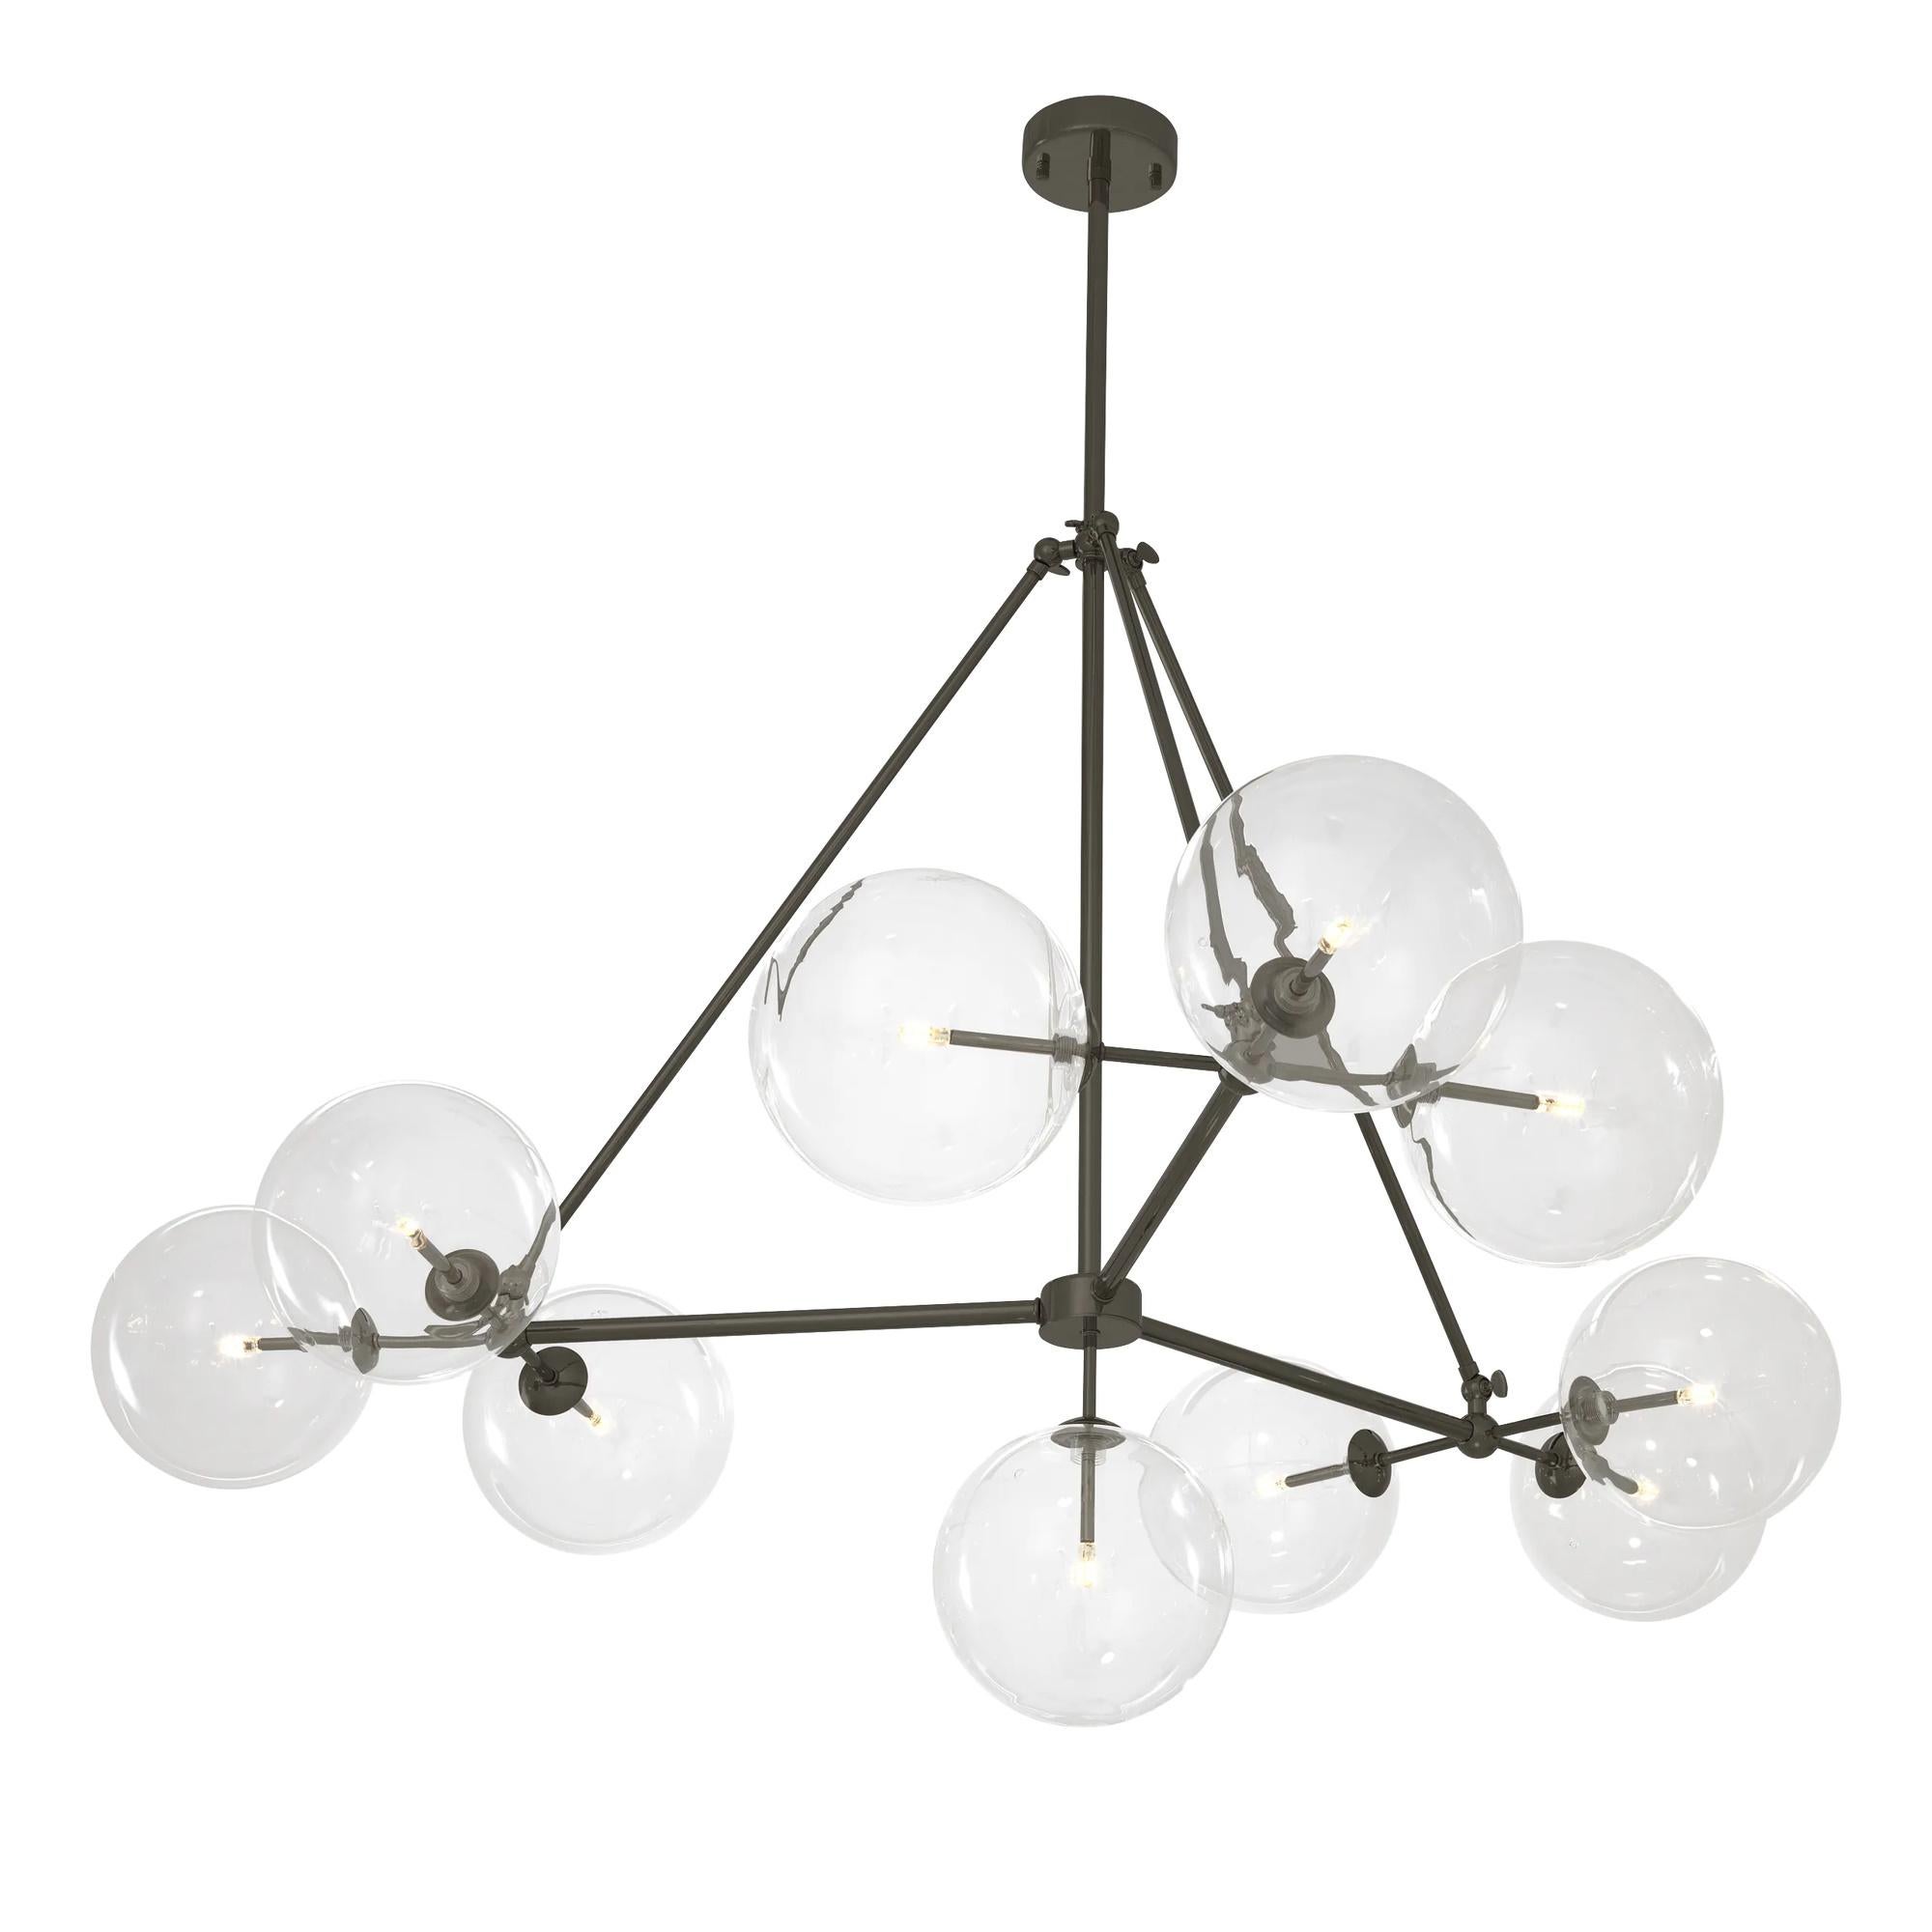 Beautiful Bermude chandelier with bronze/brass and clear glass finishes

Dimensions: ø 140 x H. 90 cm.